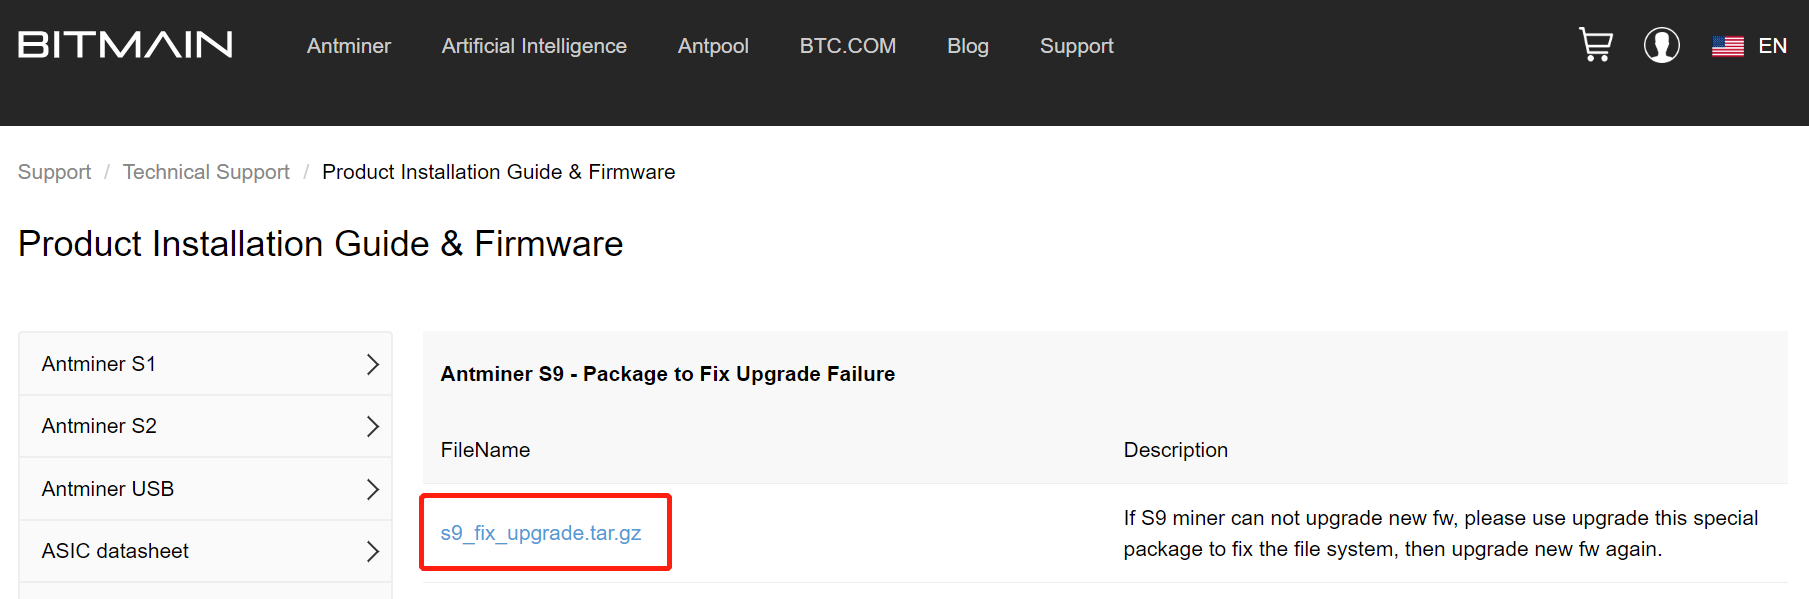 S9 package to fix upgrade failure